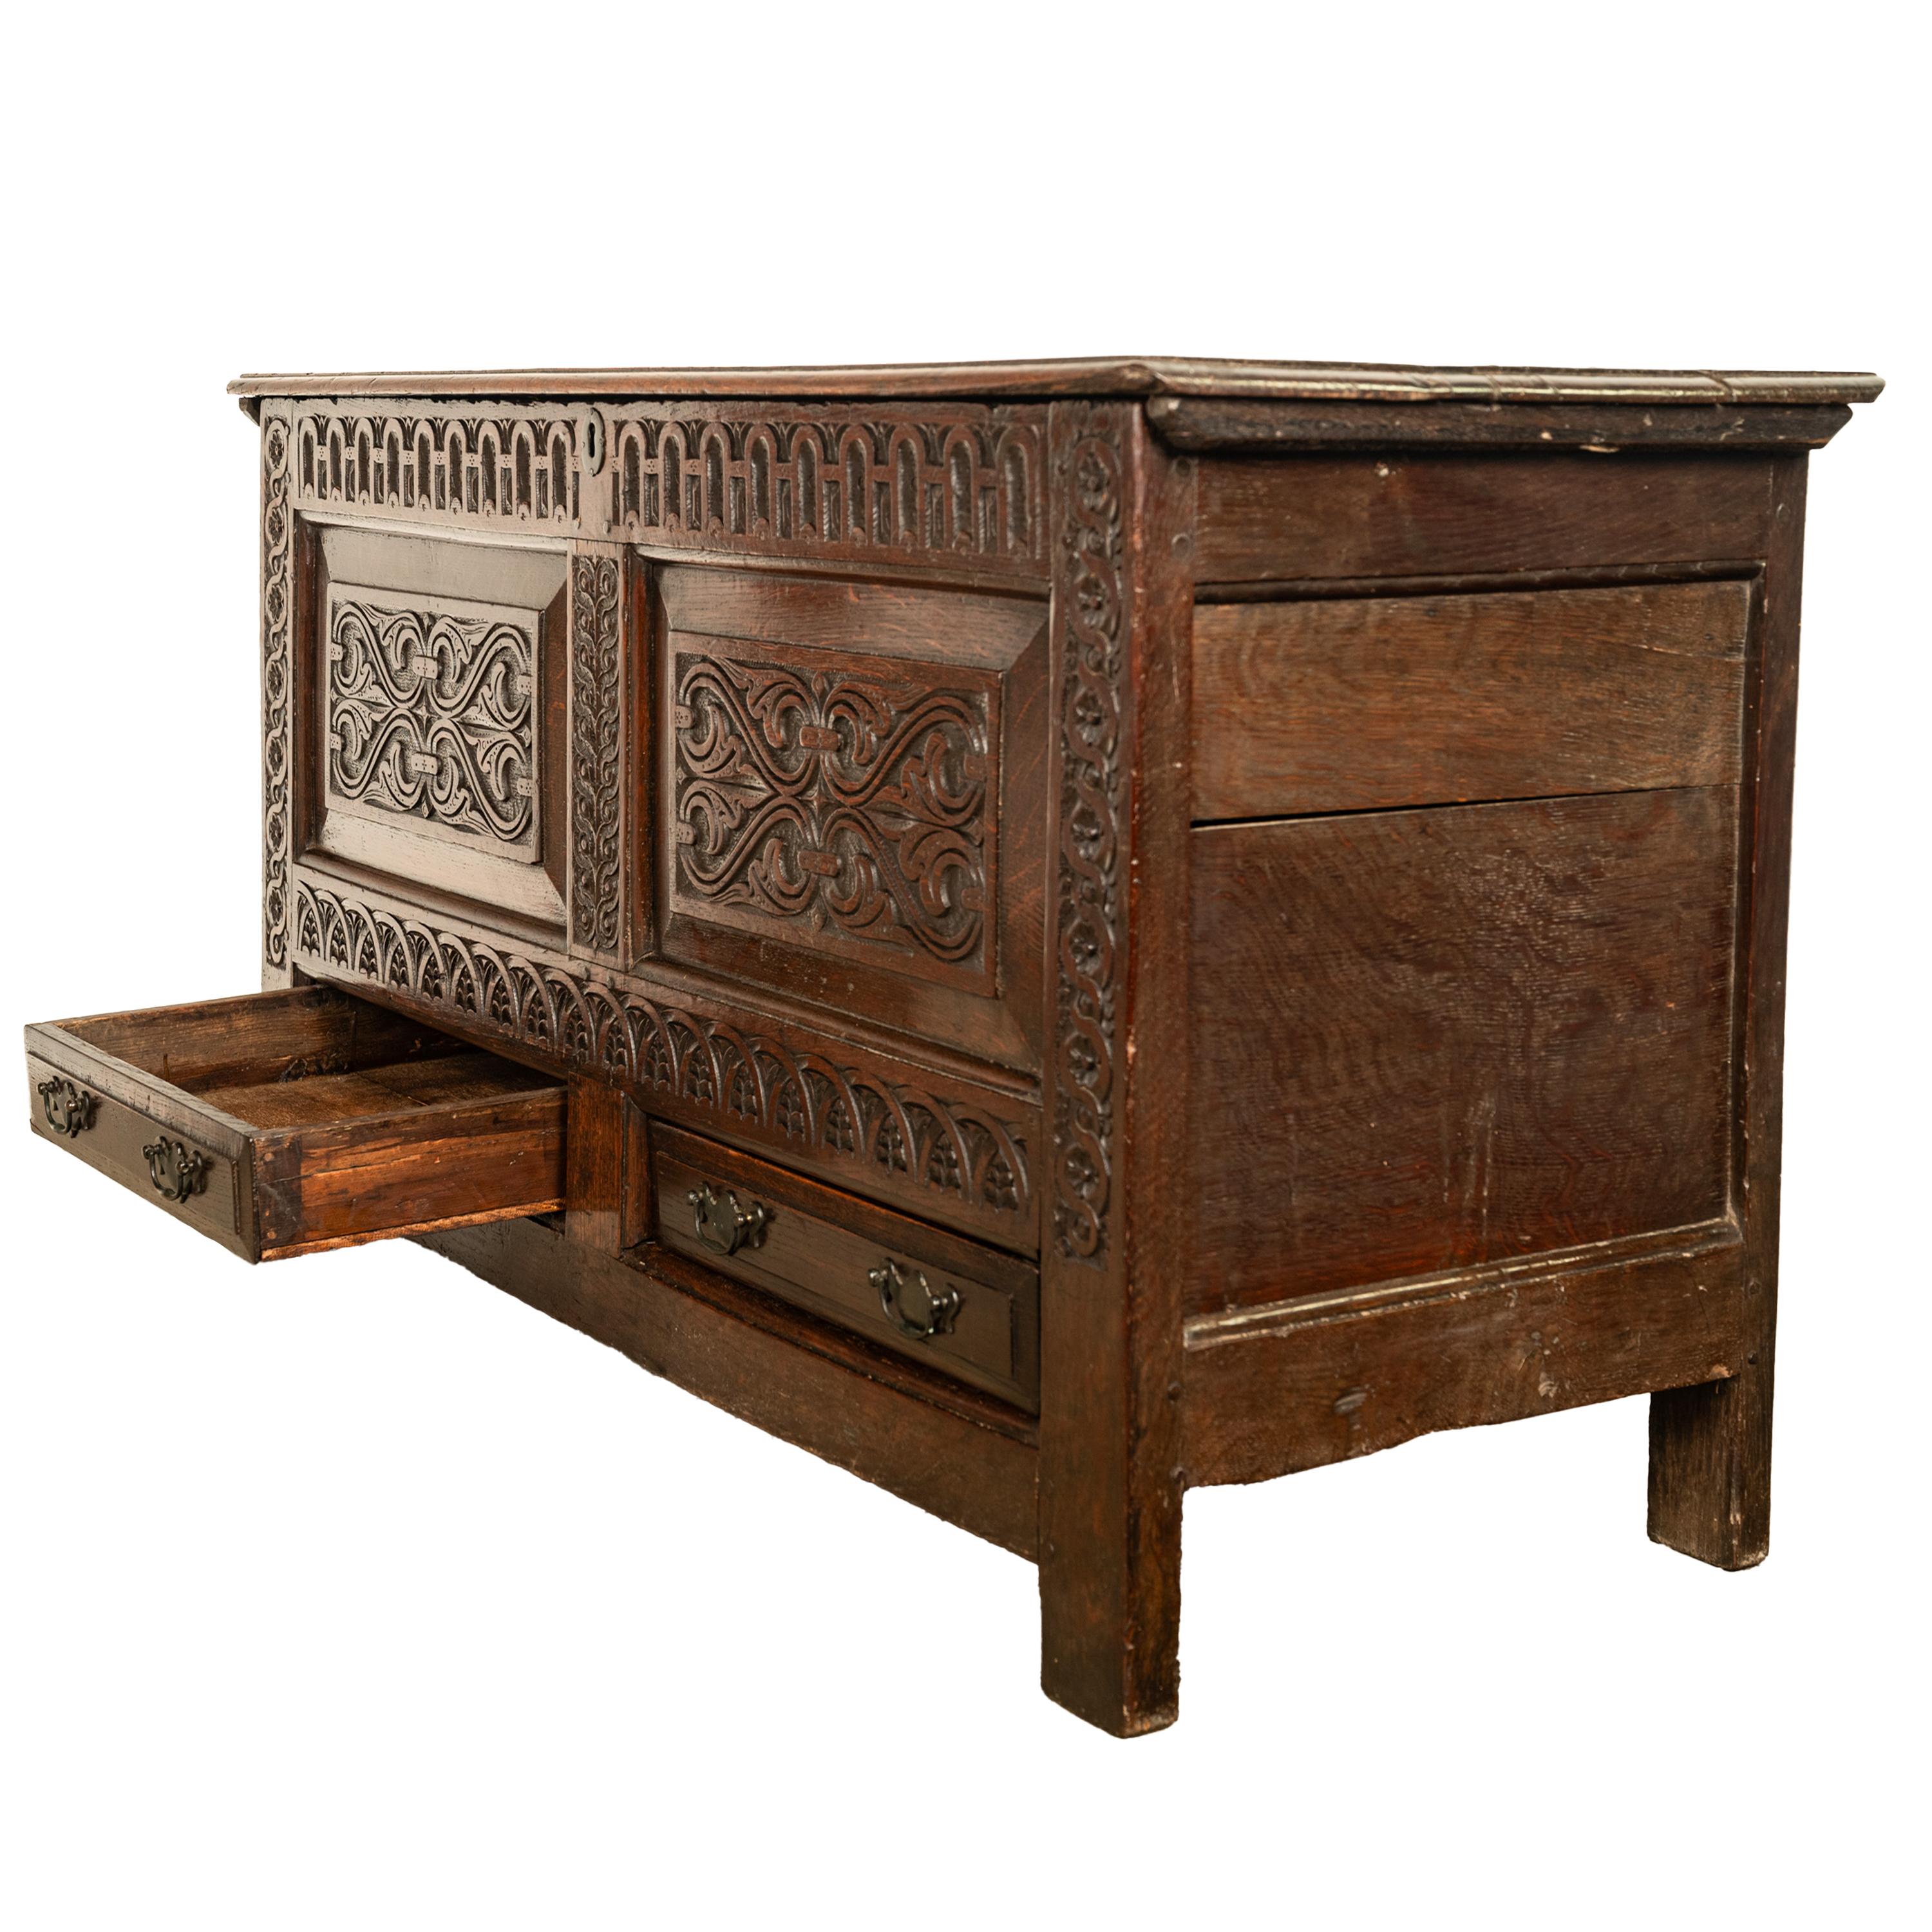  Antique English 17th Century King Charles II Carved Oak Coffer Mule Chest 1680  For Sale 1